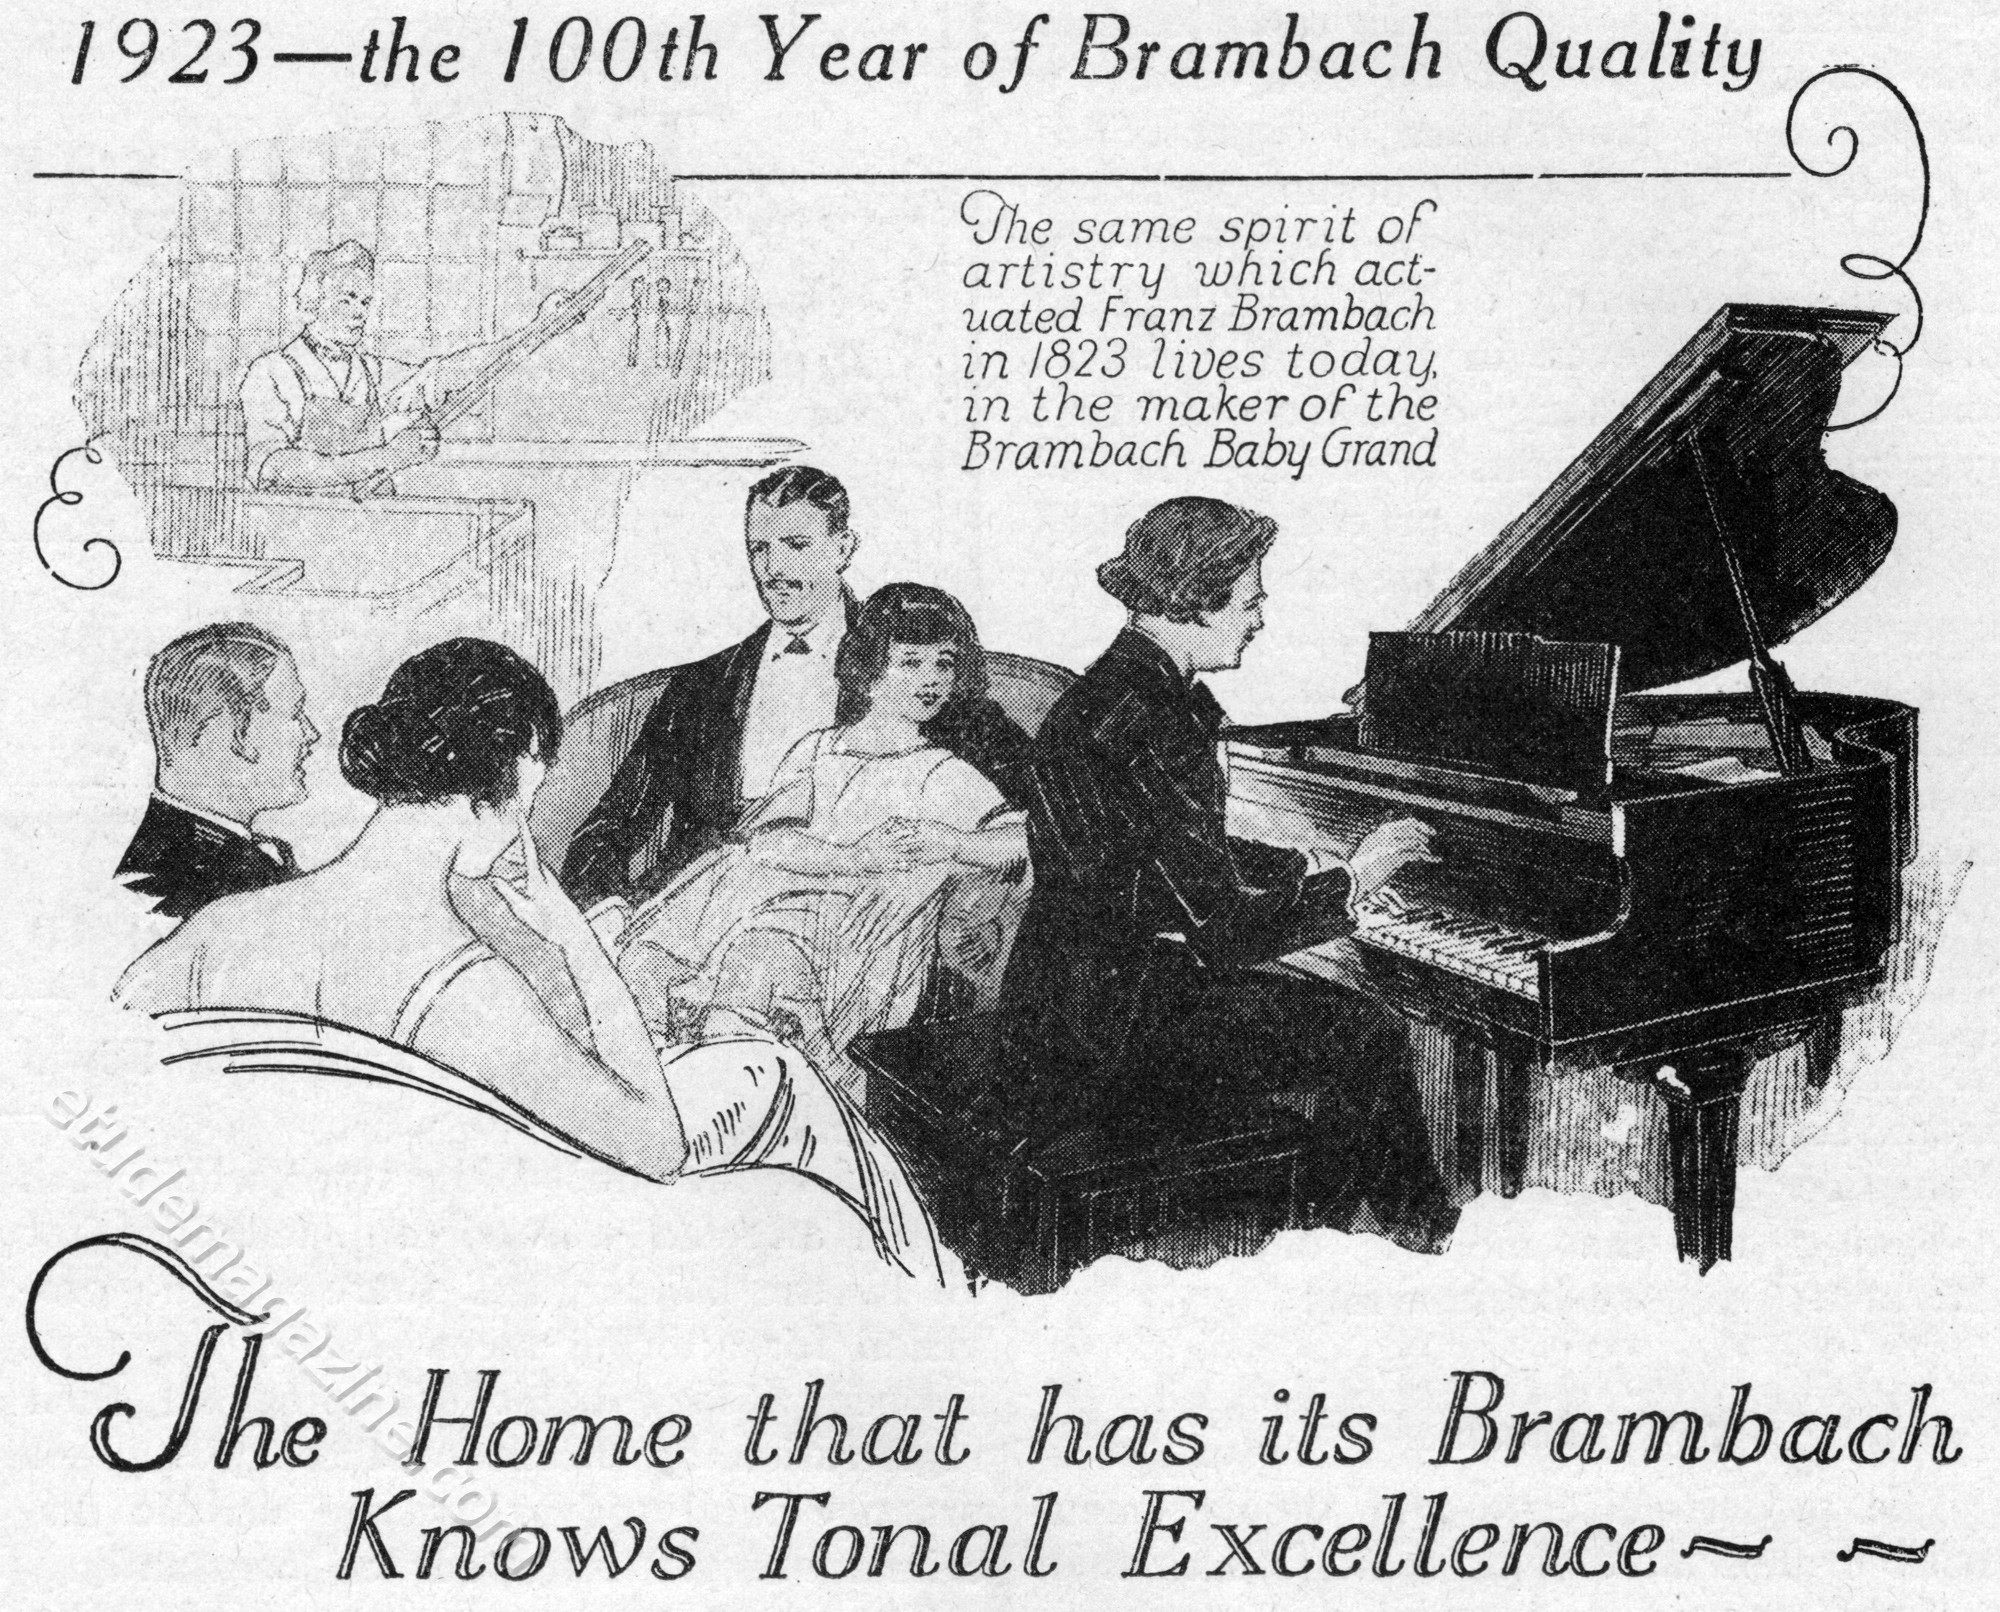 1923 - The 100th Year of Brambach Quality